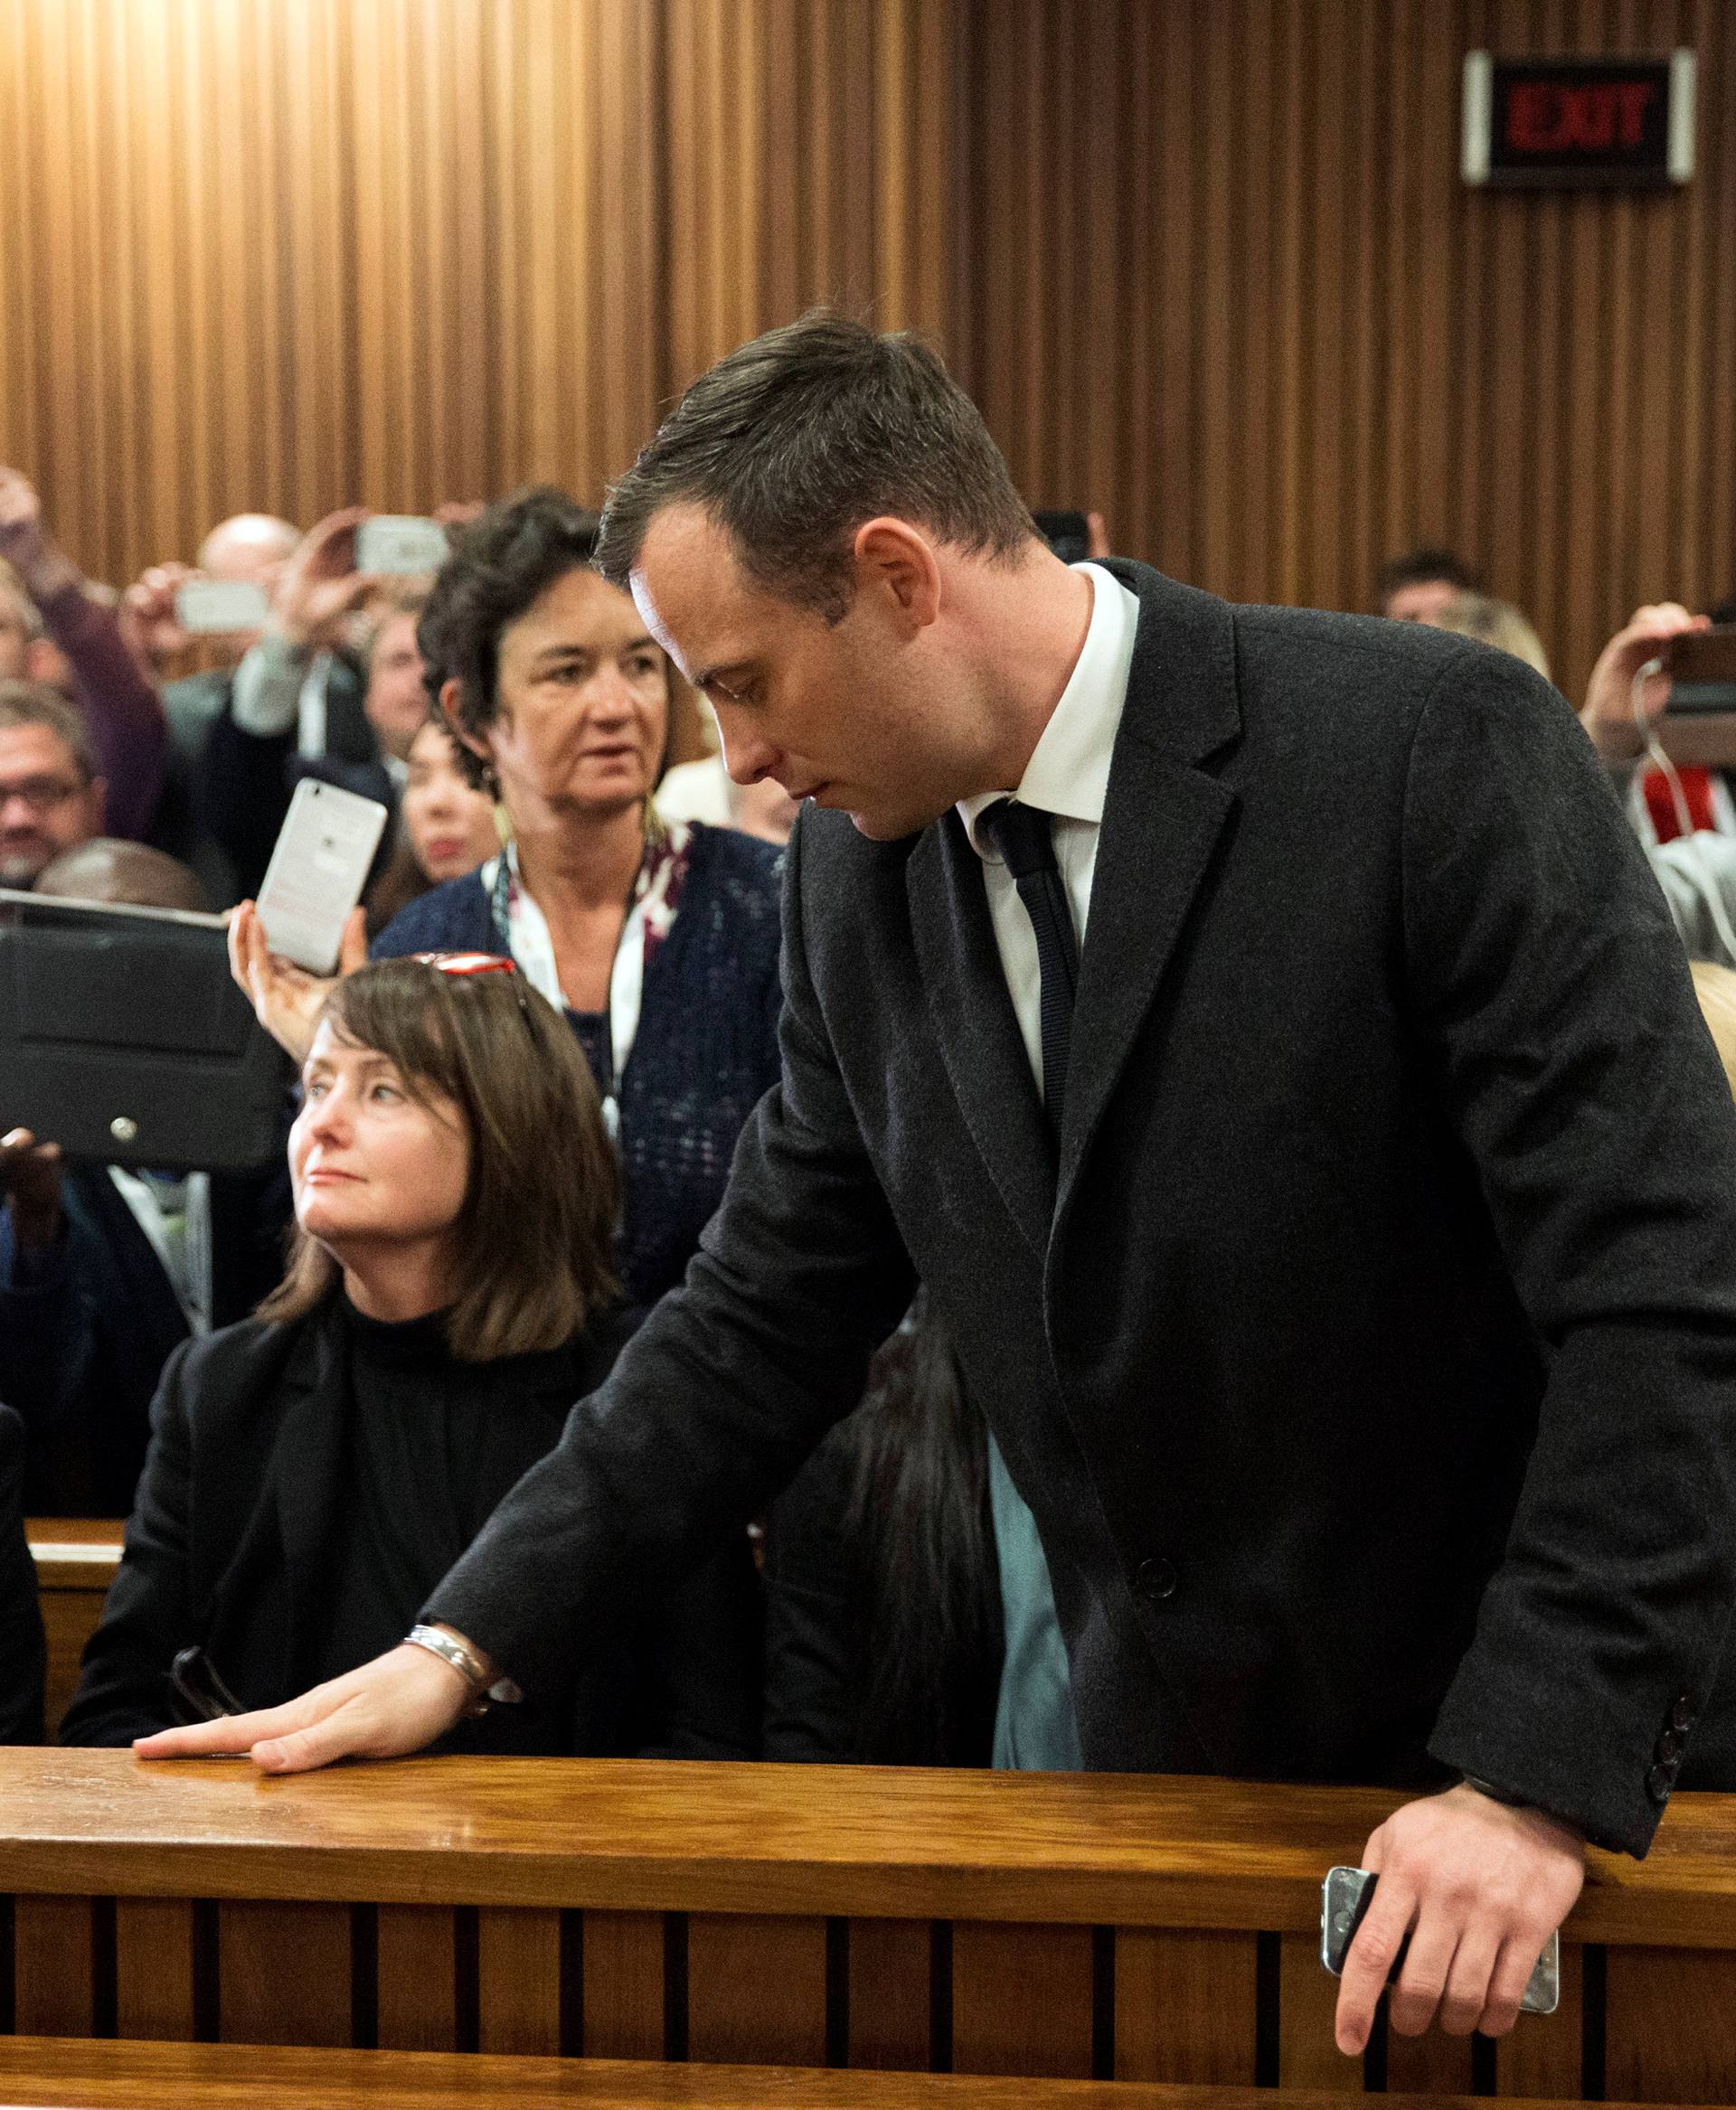 Olympic and Paralympic track star Oscar Pistorius arrives for sentencing at the North Gauteng High Court in Pretoria